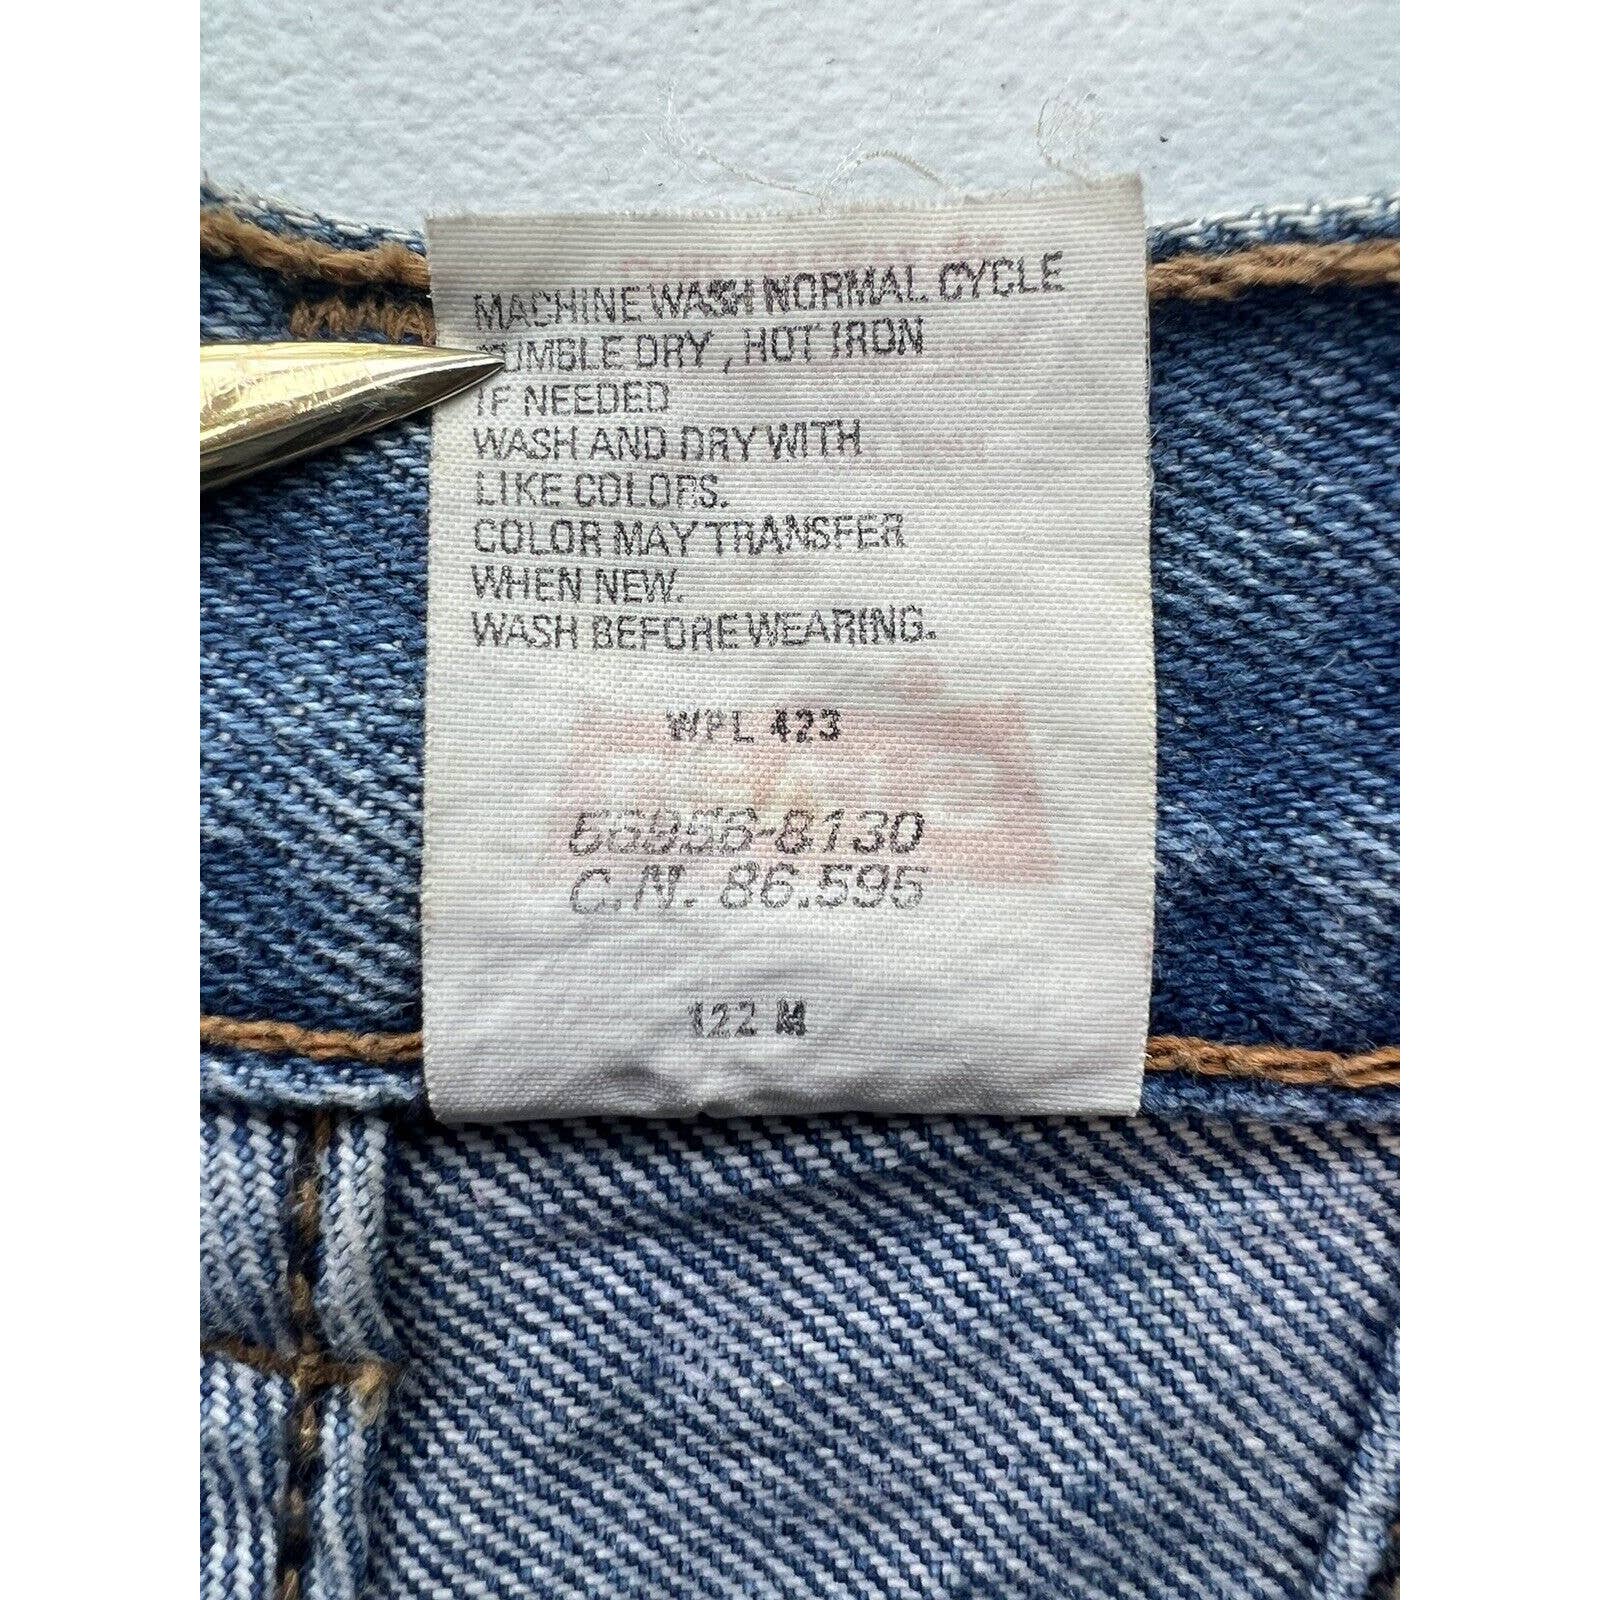 Levi’s 900 Series High Rise Mom Jeans Women’s 16 Tapered Leg Vintage Silver Tab